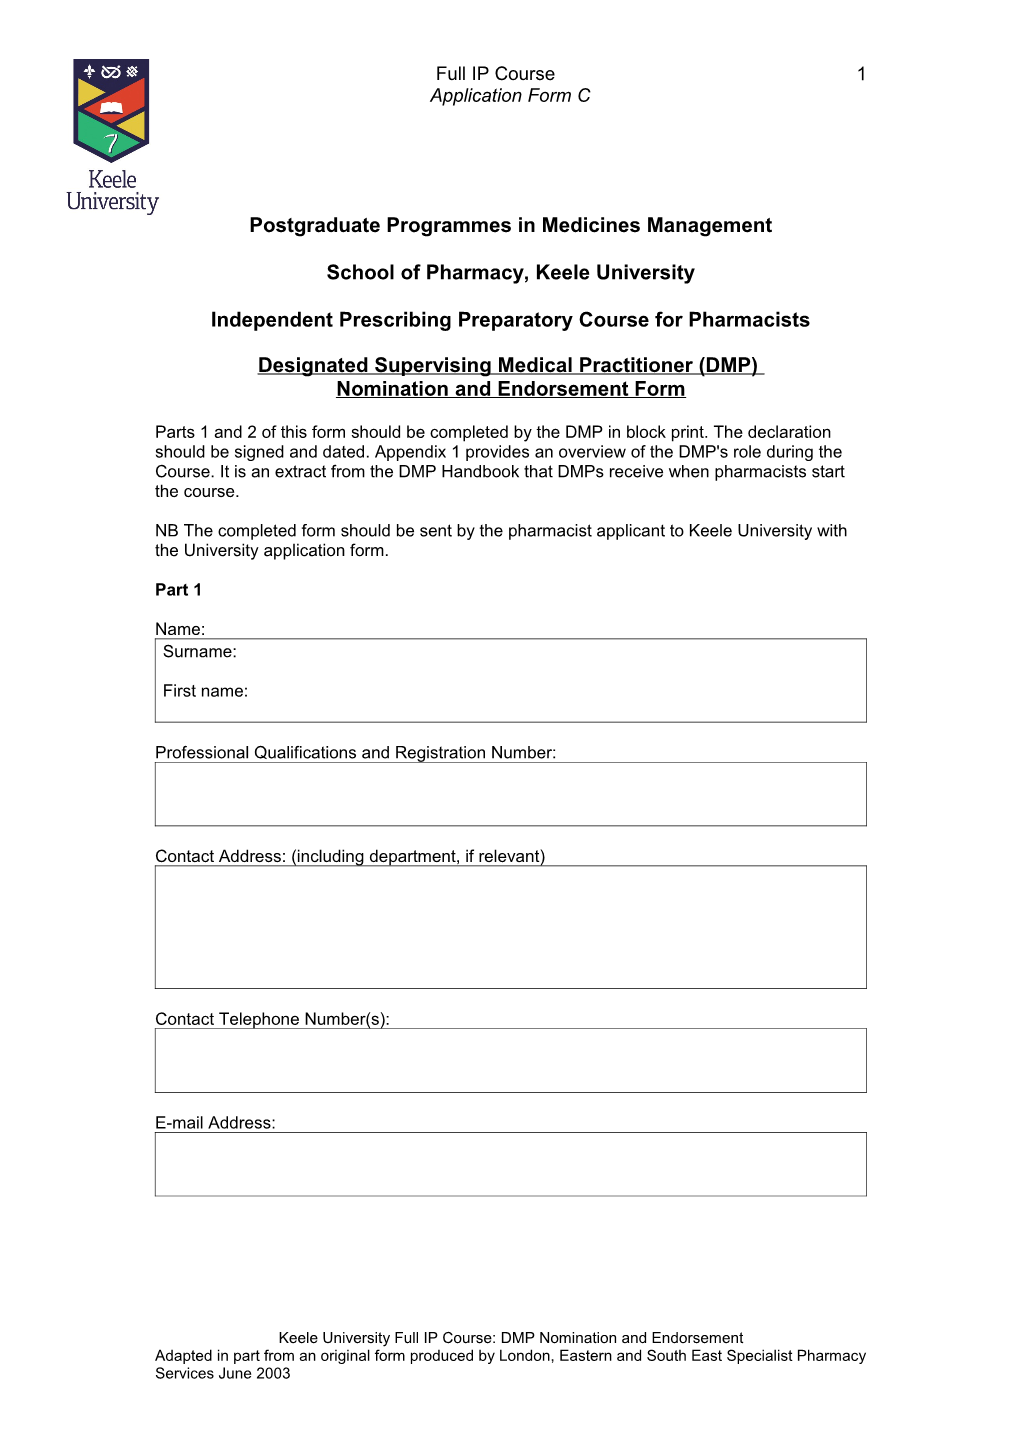 Supplementary Prescribing Preparatory Course for Pharmacists